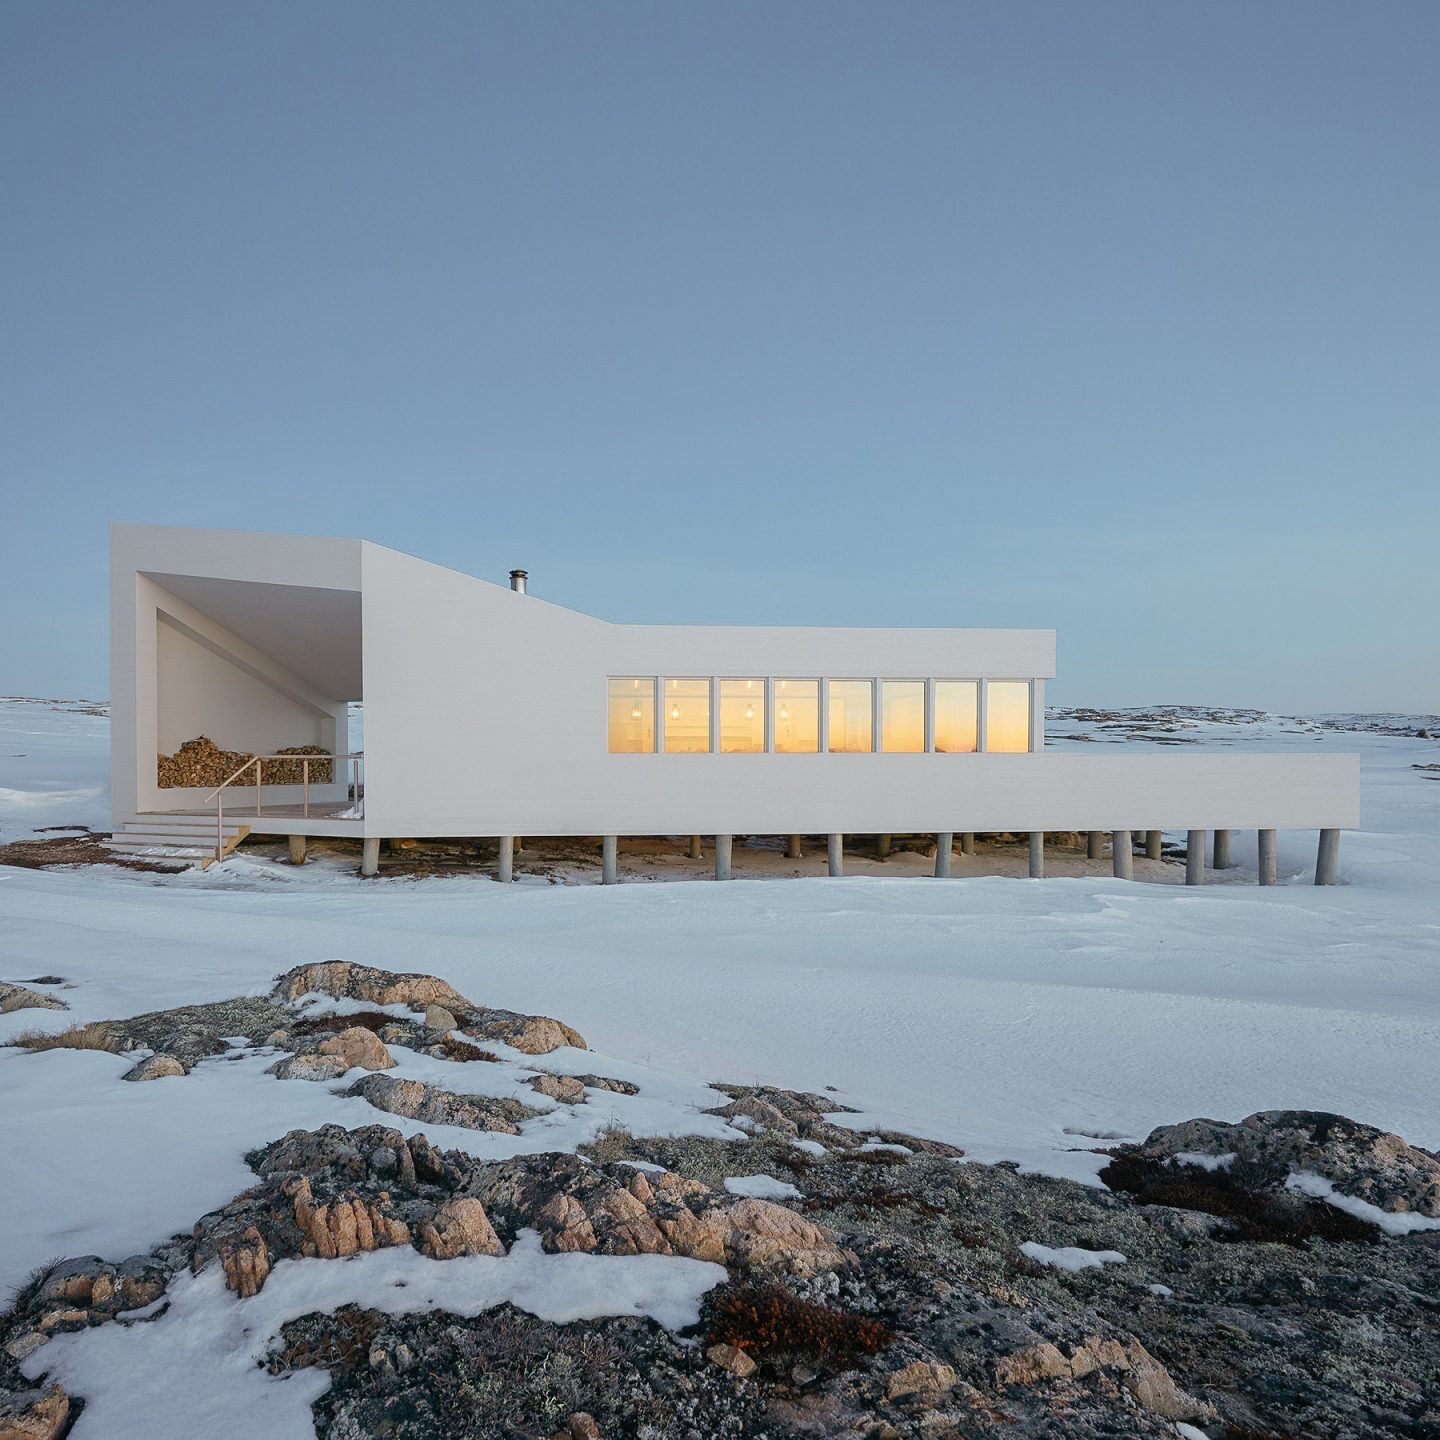 ignant-adesign-award-competition-todd-saunders-fogo-island-shed-1-2